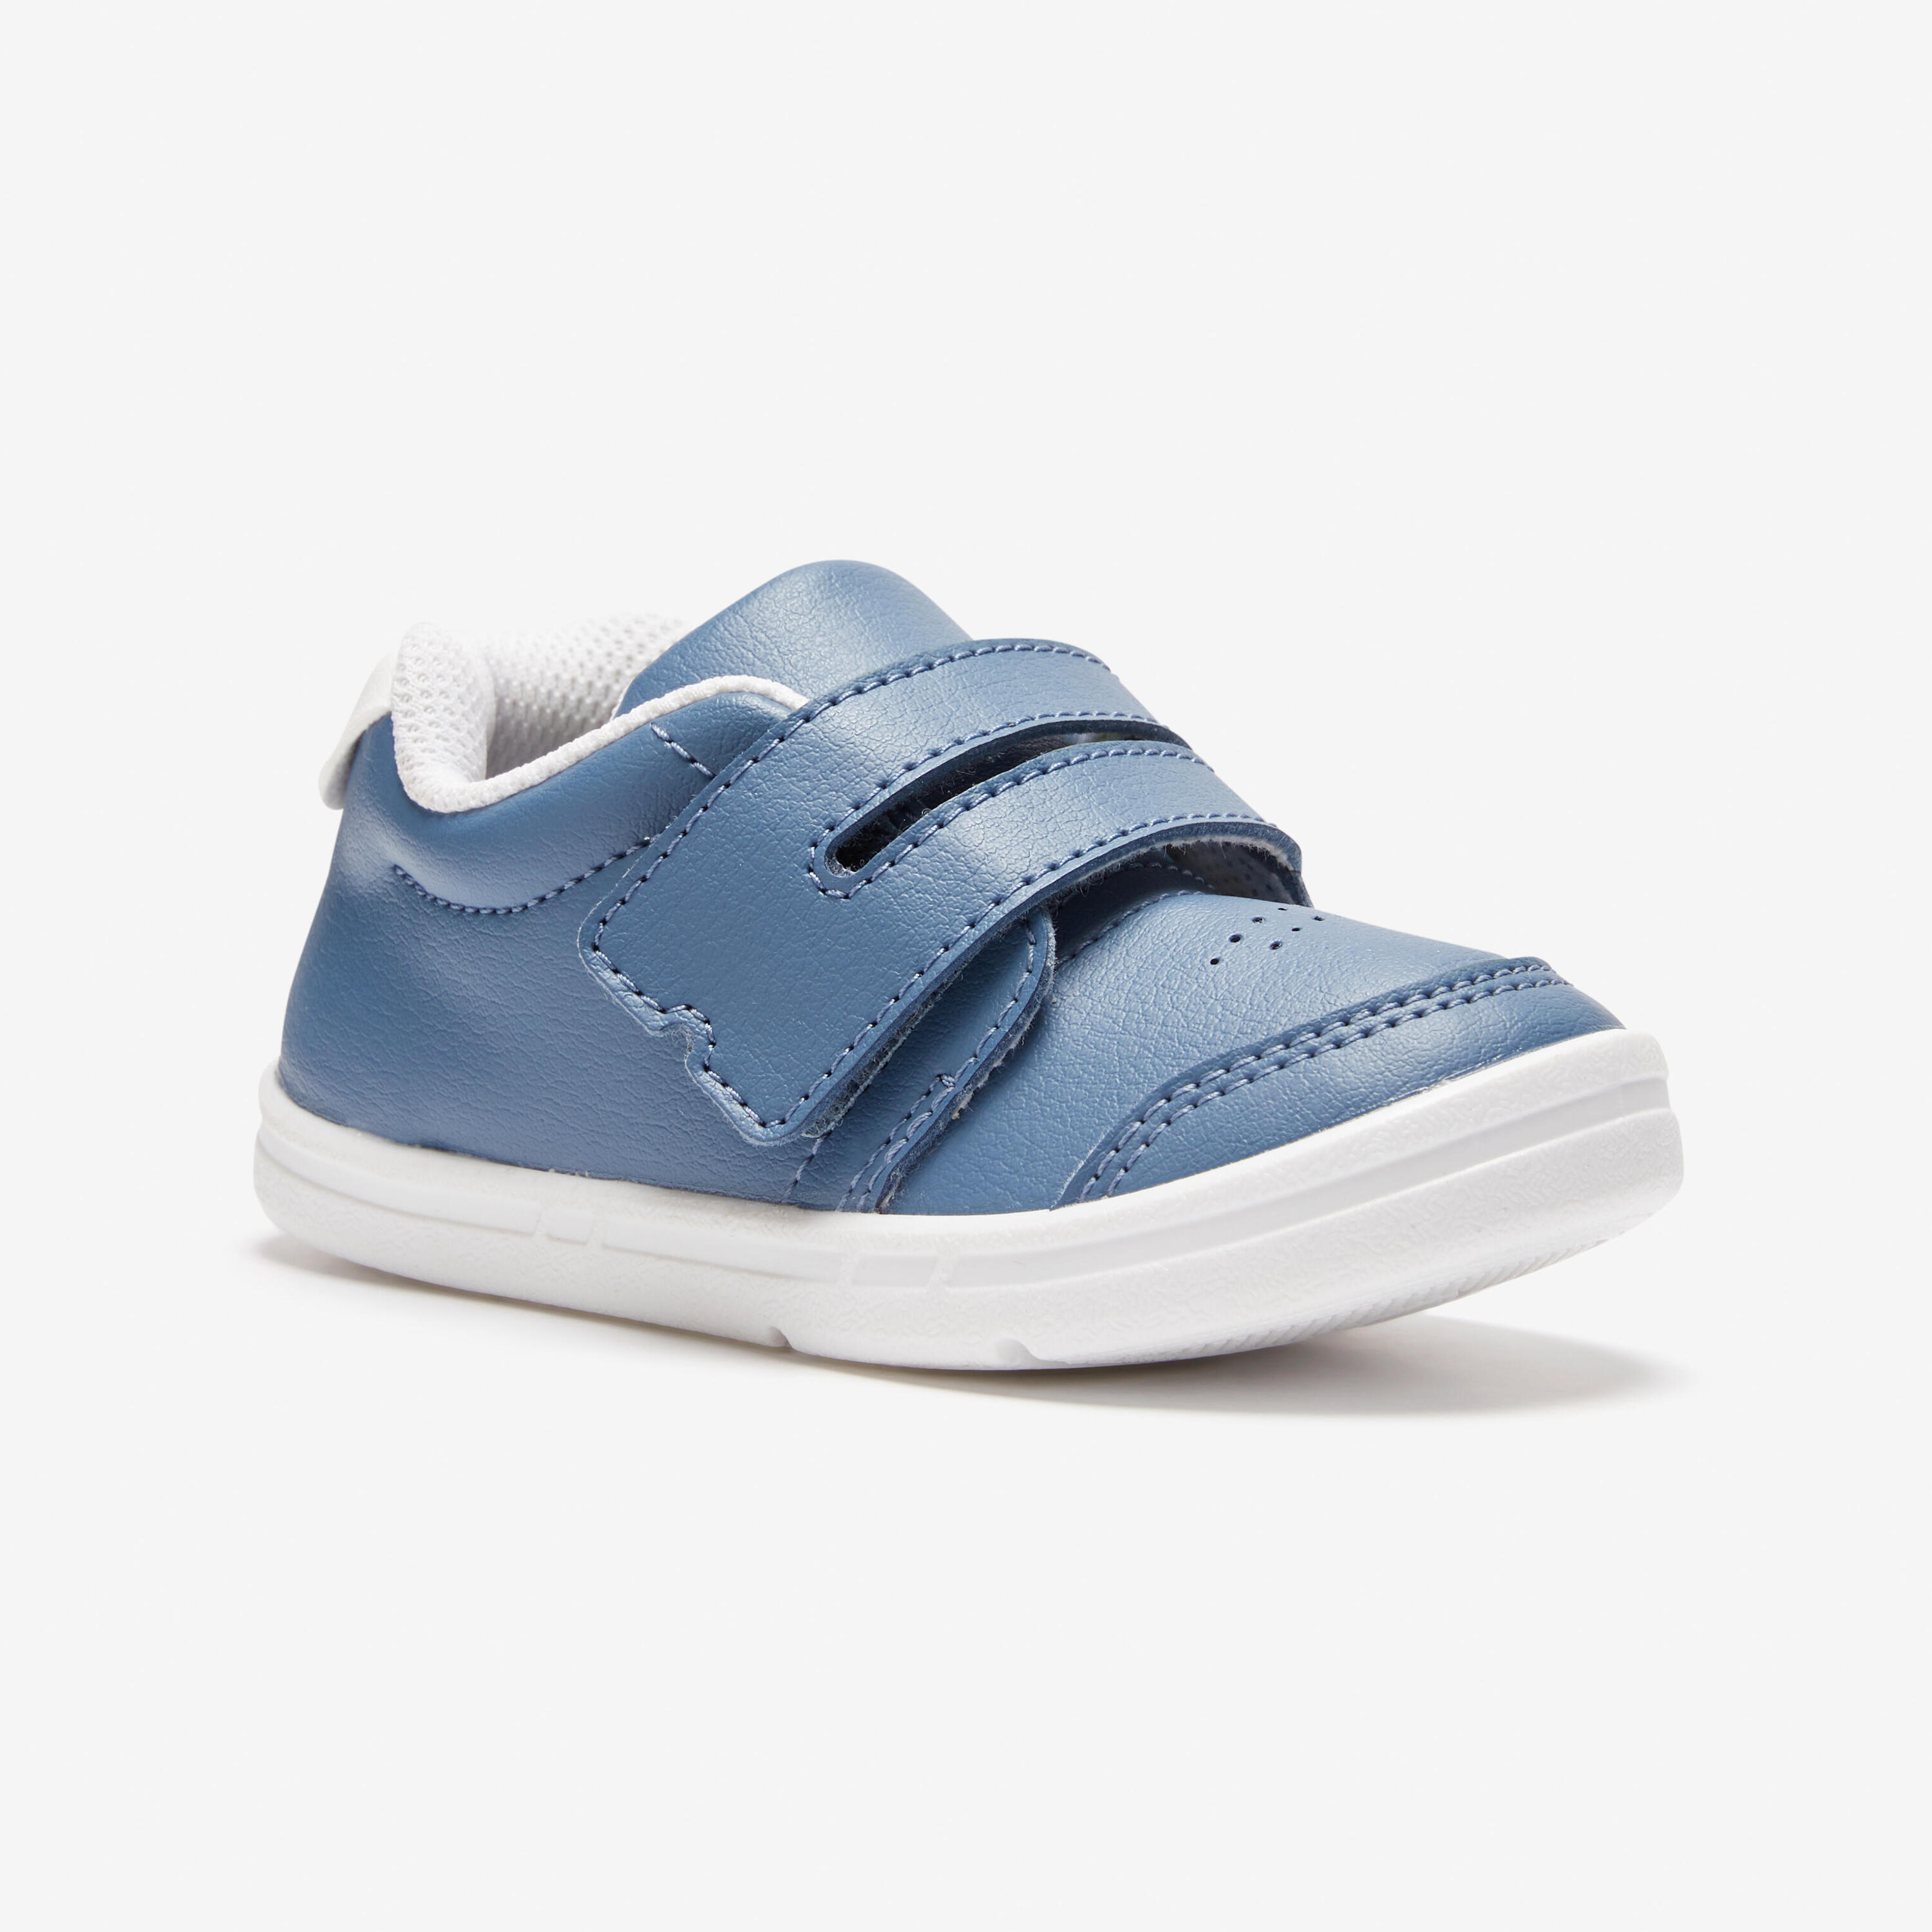 Kids' Rip-Tab First Step Shoes Size 3.5C to 6.5C I Learn 1/9